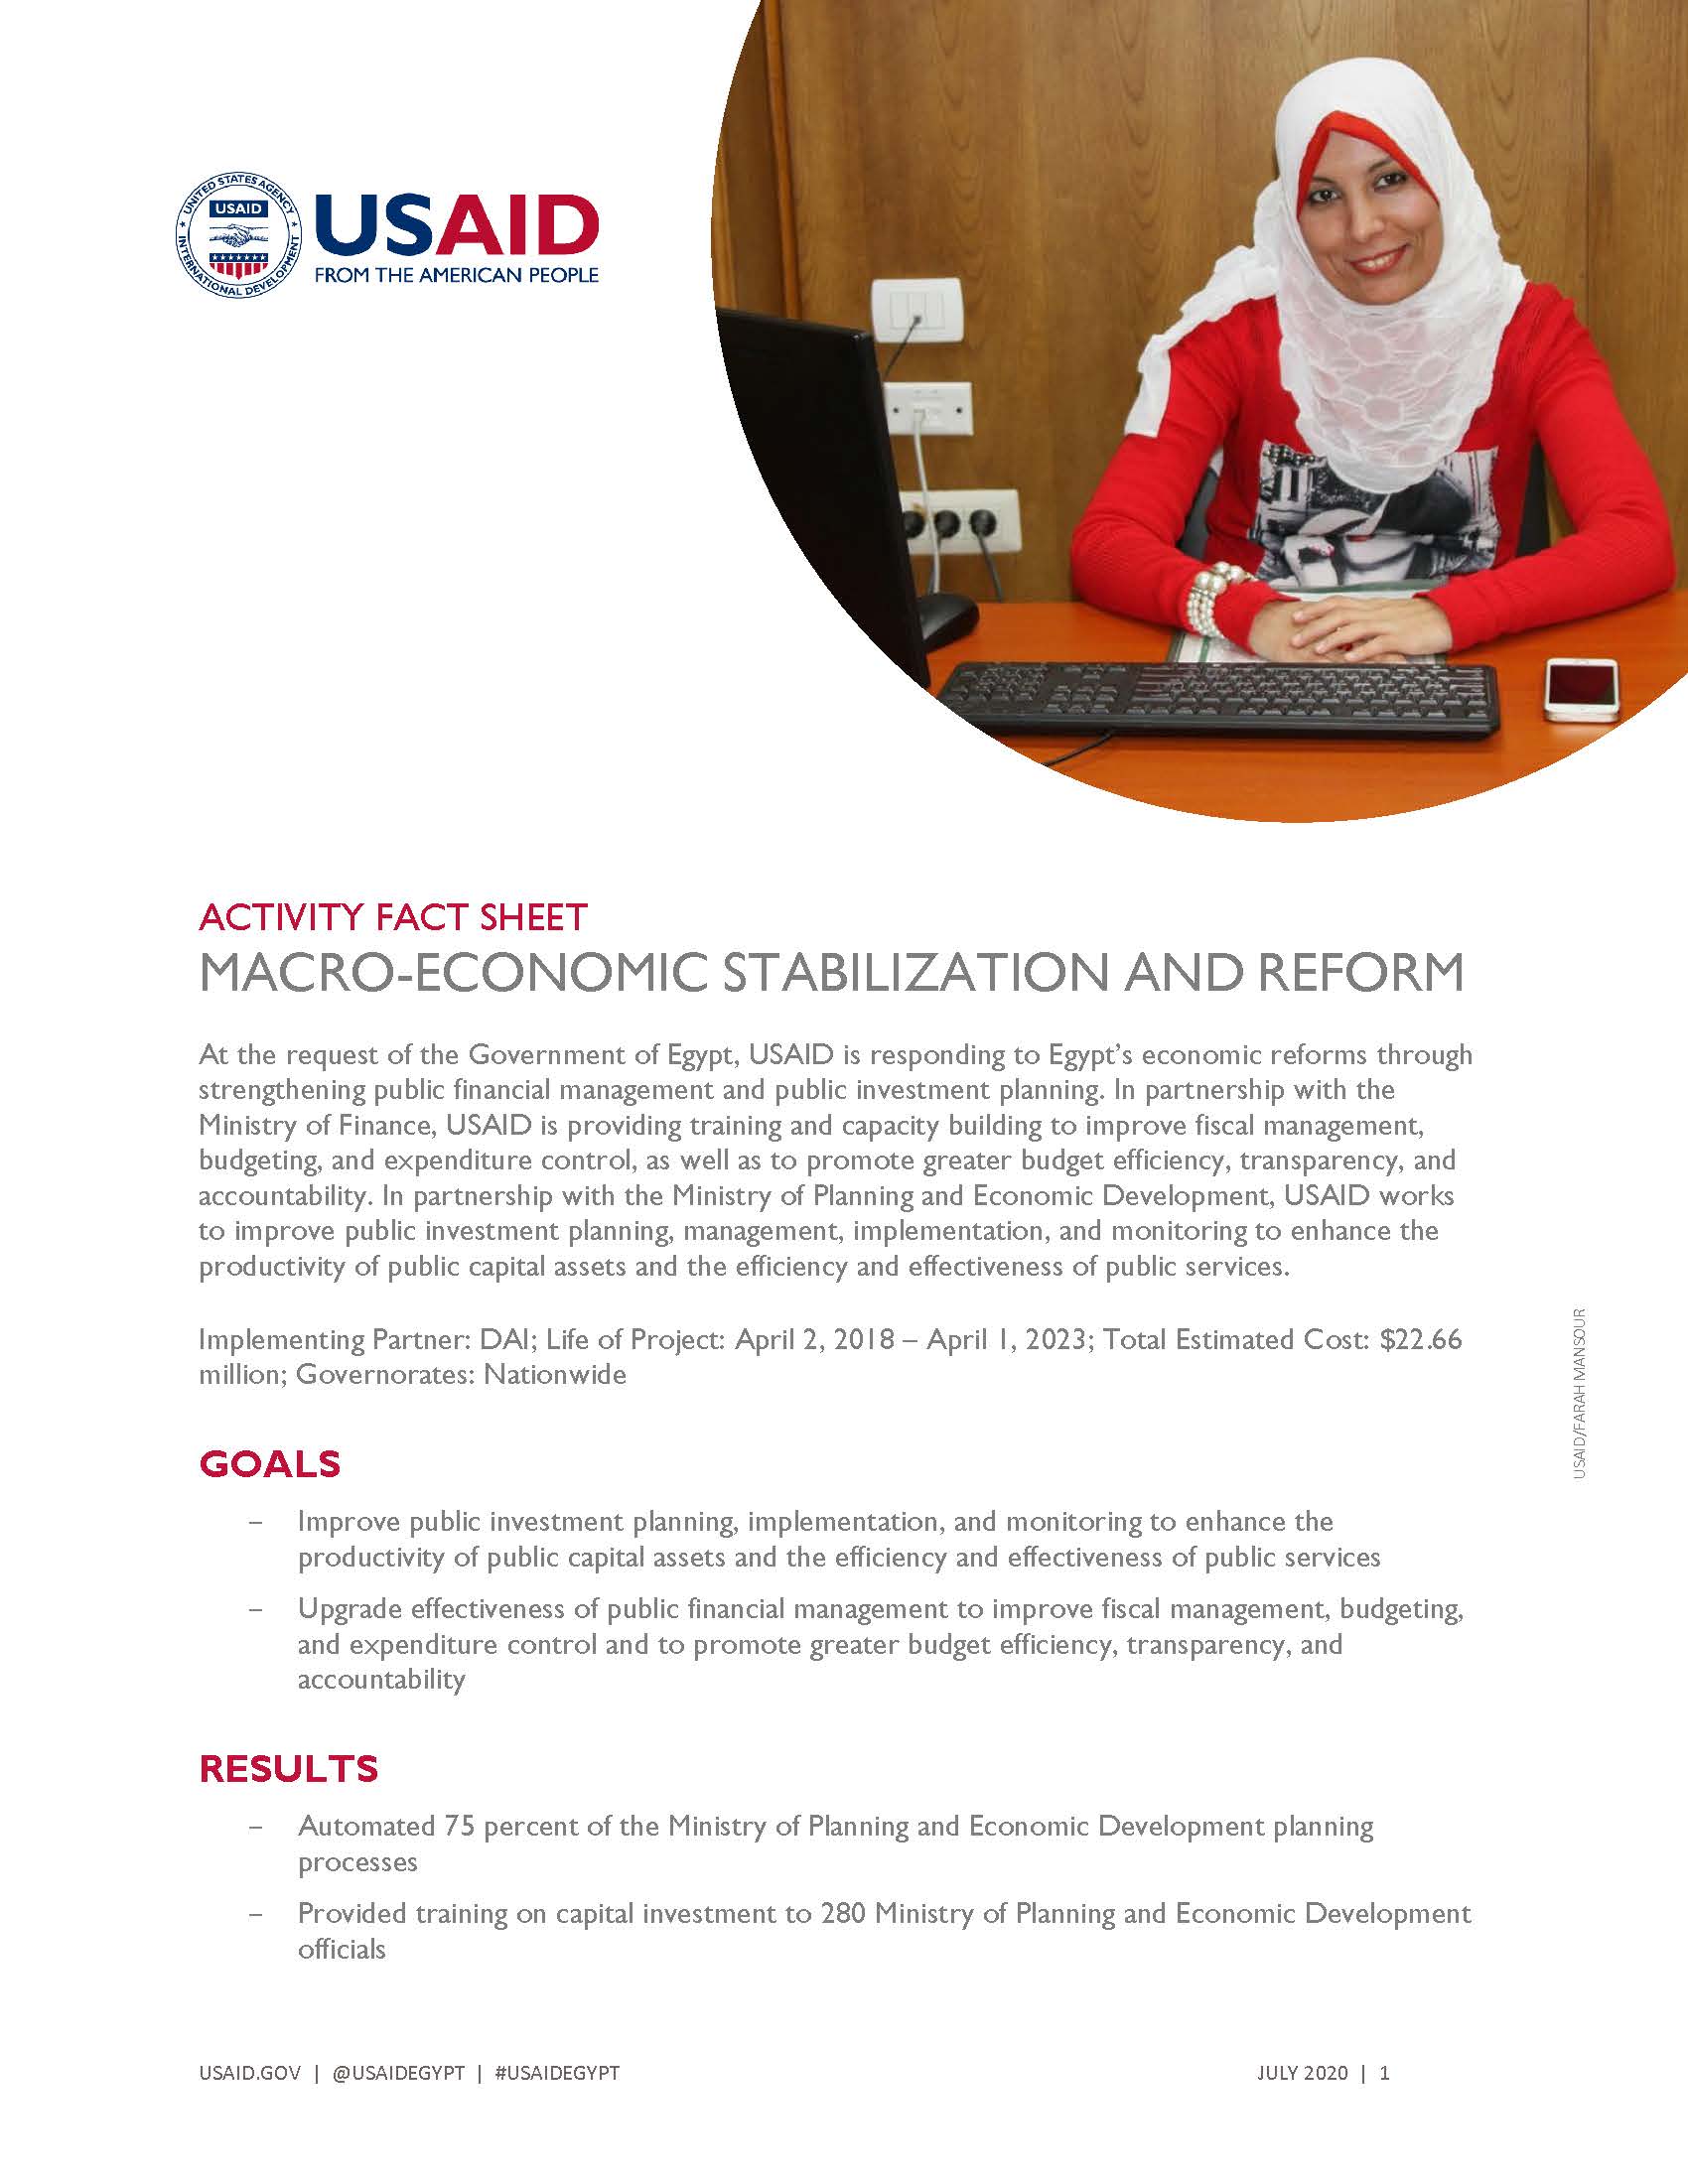 USAID/Egypt Activity Fact Sheet: Macro-Economic Stabilization and Reform